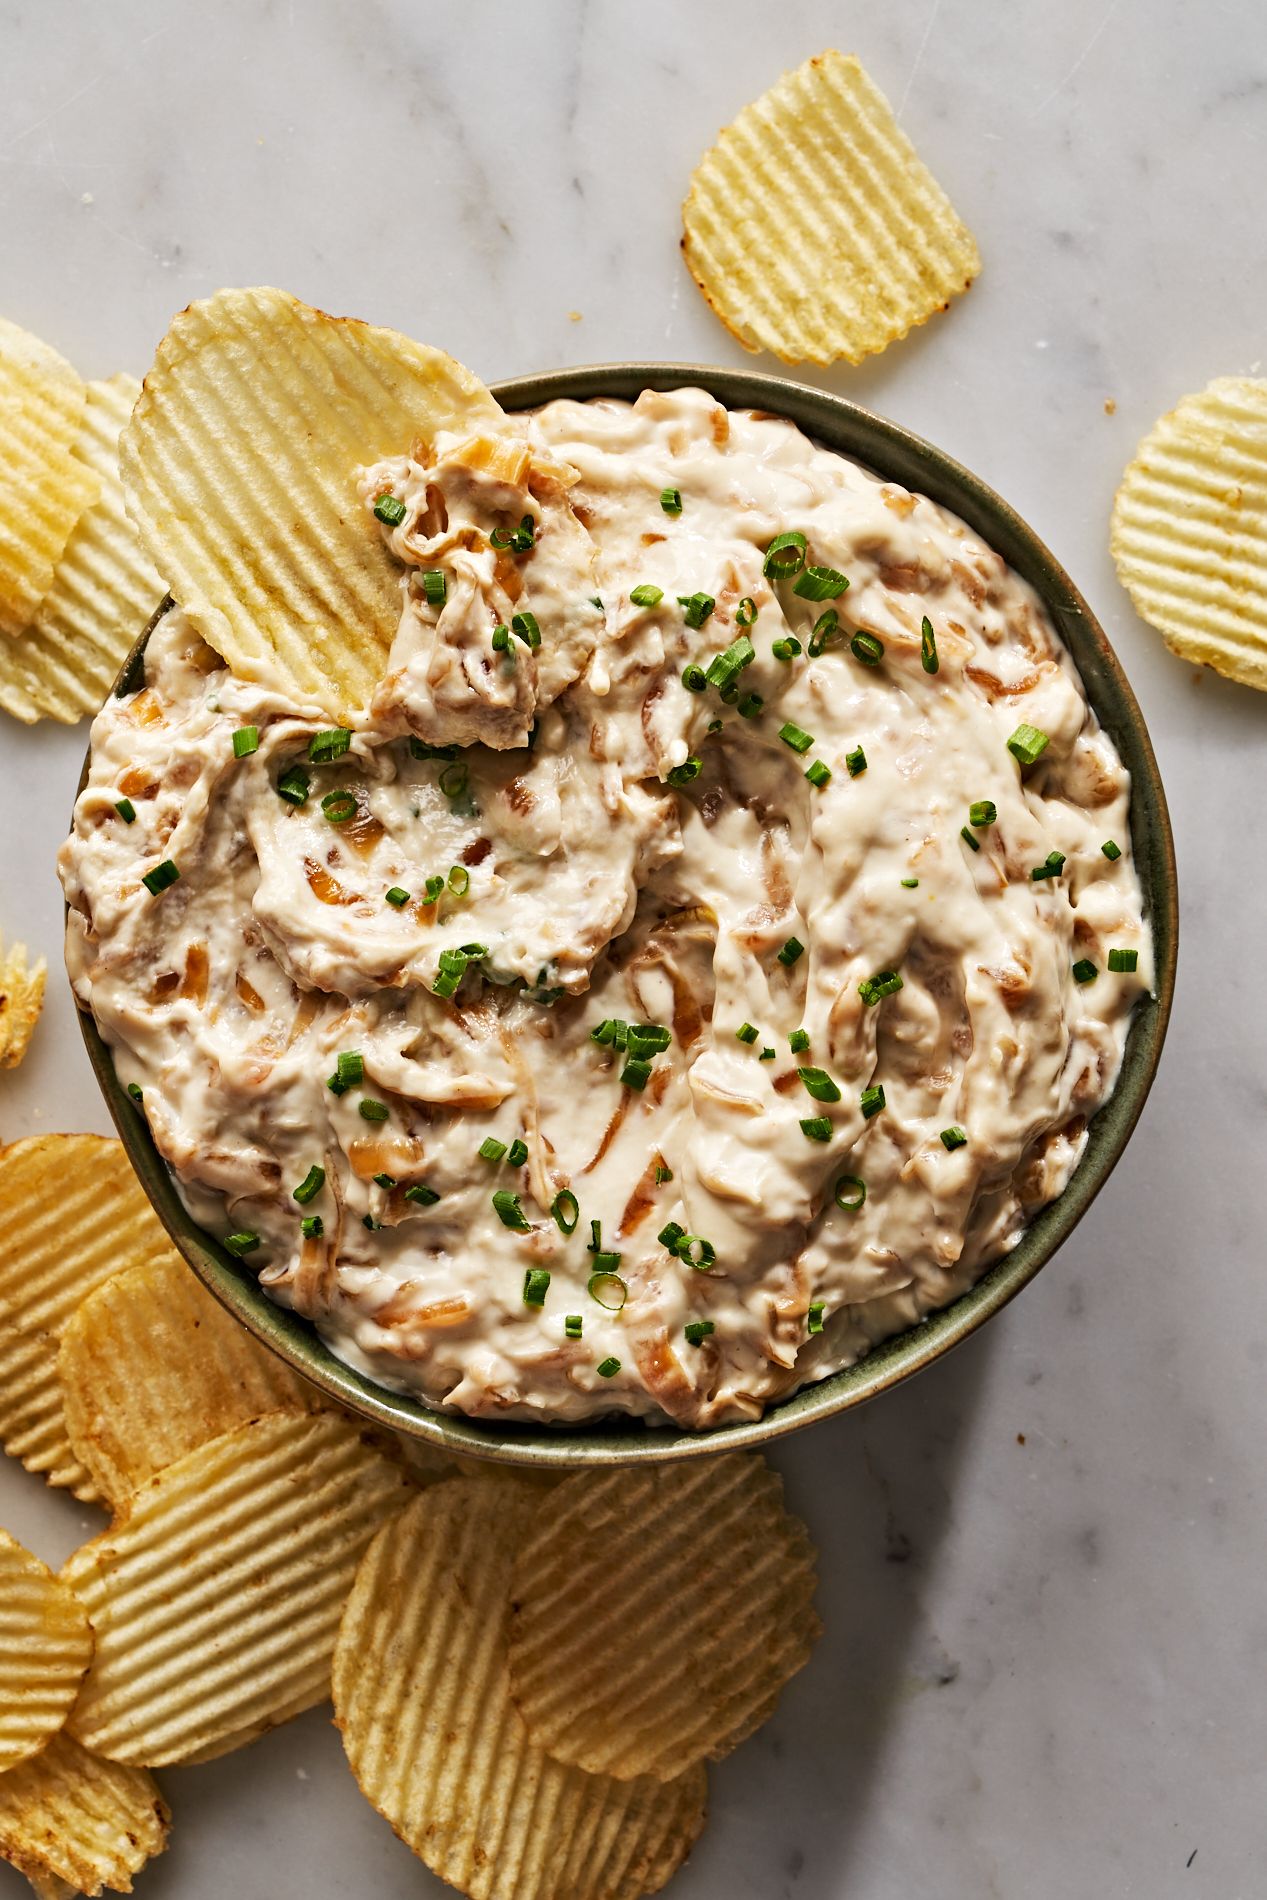 Green Onion Dip Recipe: Make it for Your Next Bash